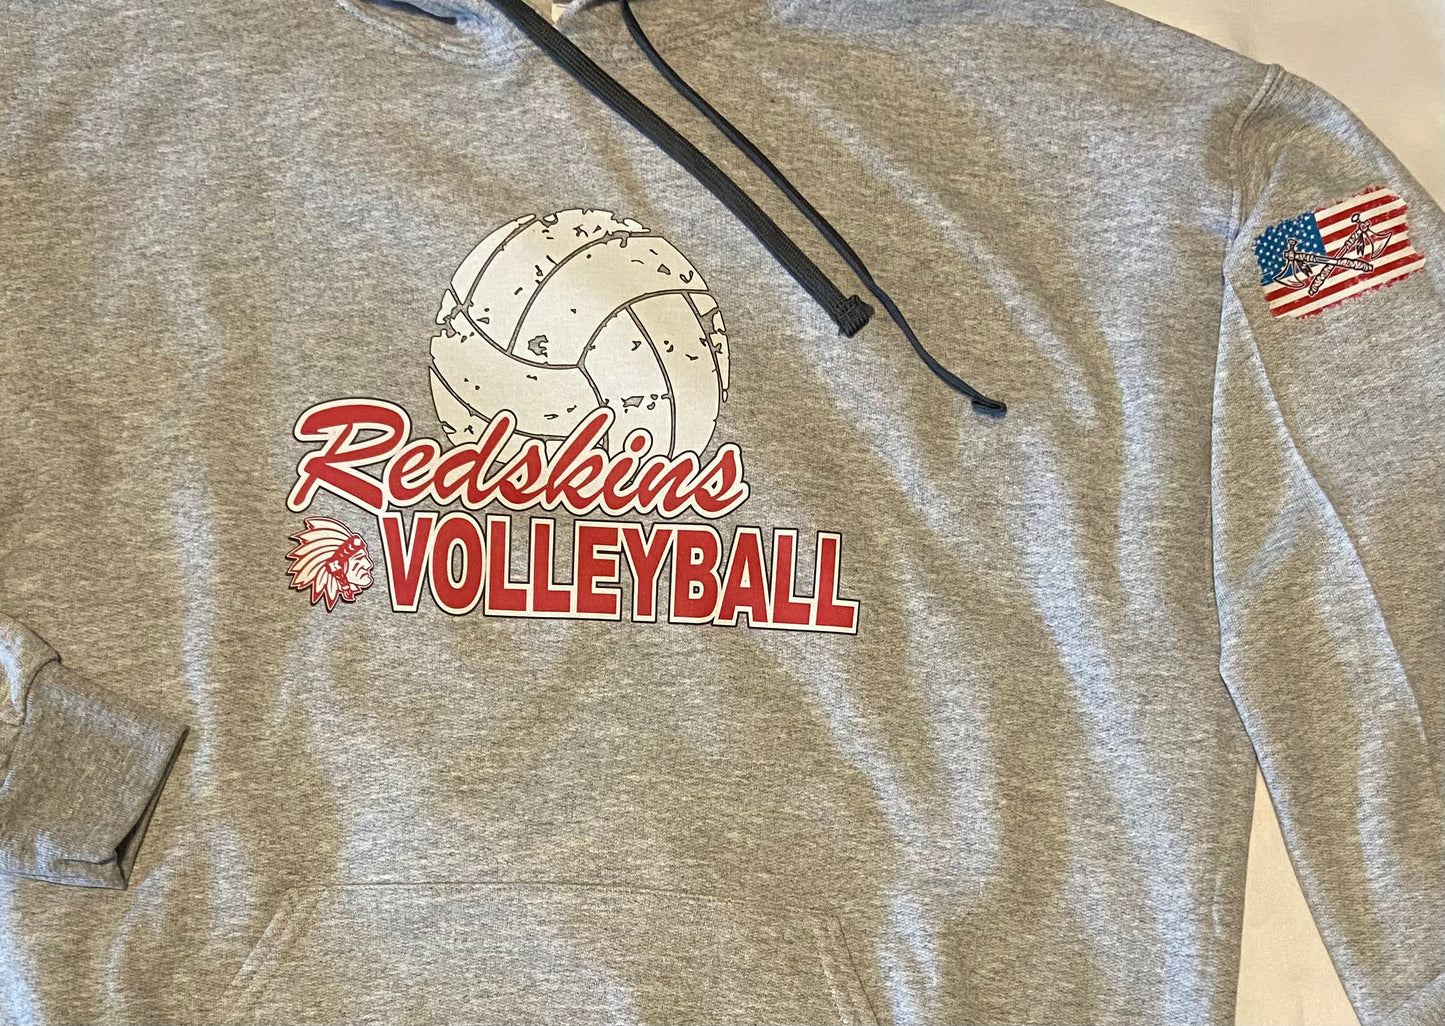 Knox Redskins VOLLEYBALL Team Hoodie - Grey - Adult and Youth Sizes